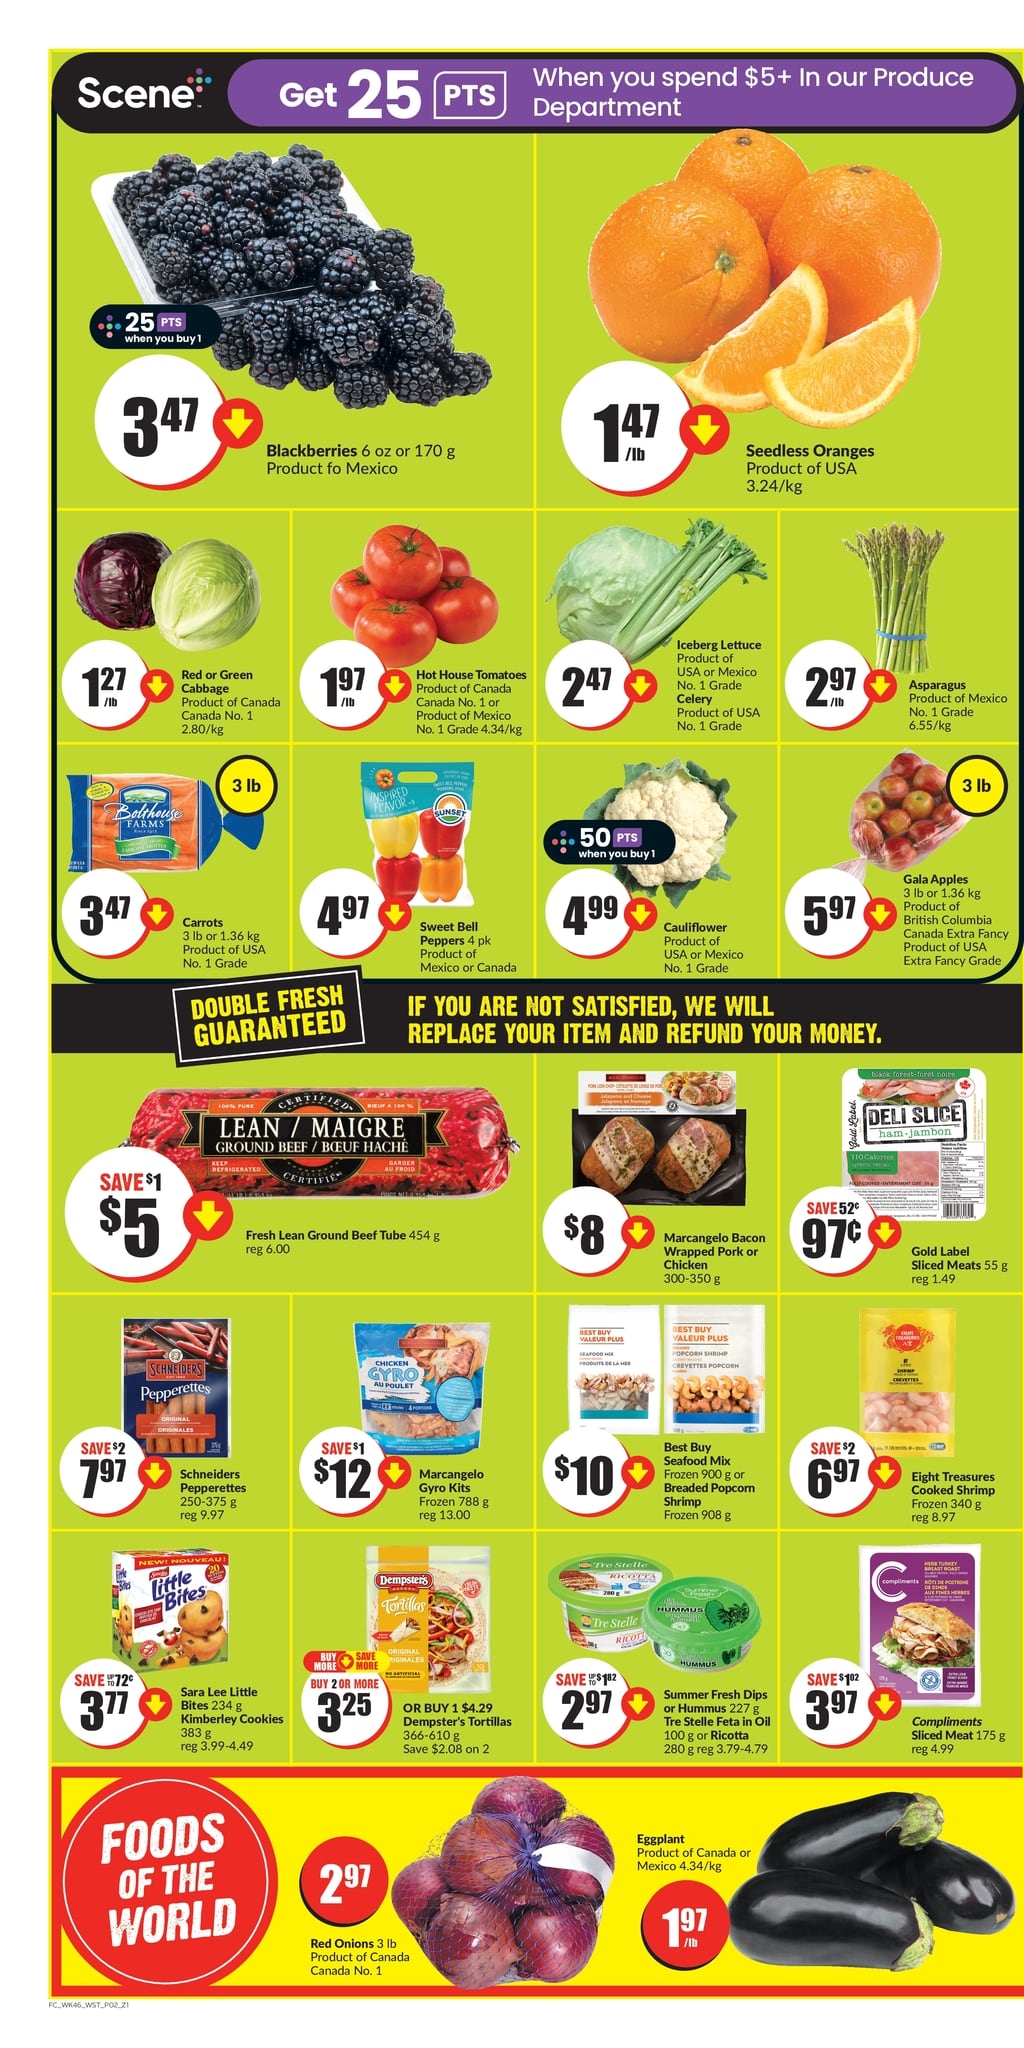 FreshCo - British Columbia - Weekly Flyer Specials - Page 2